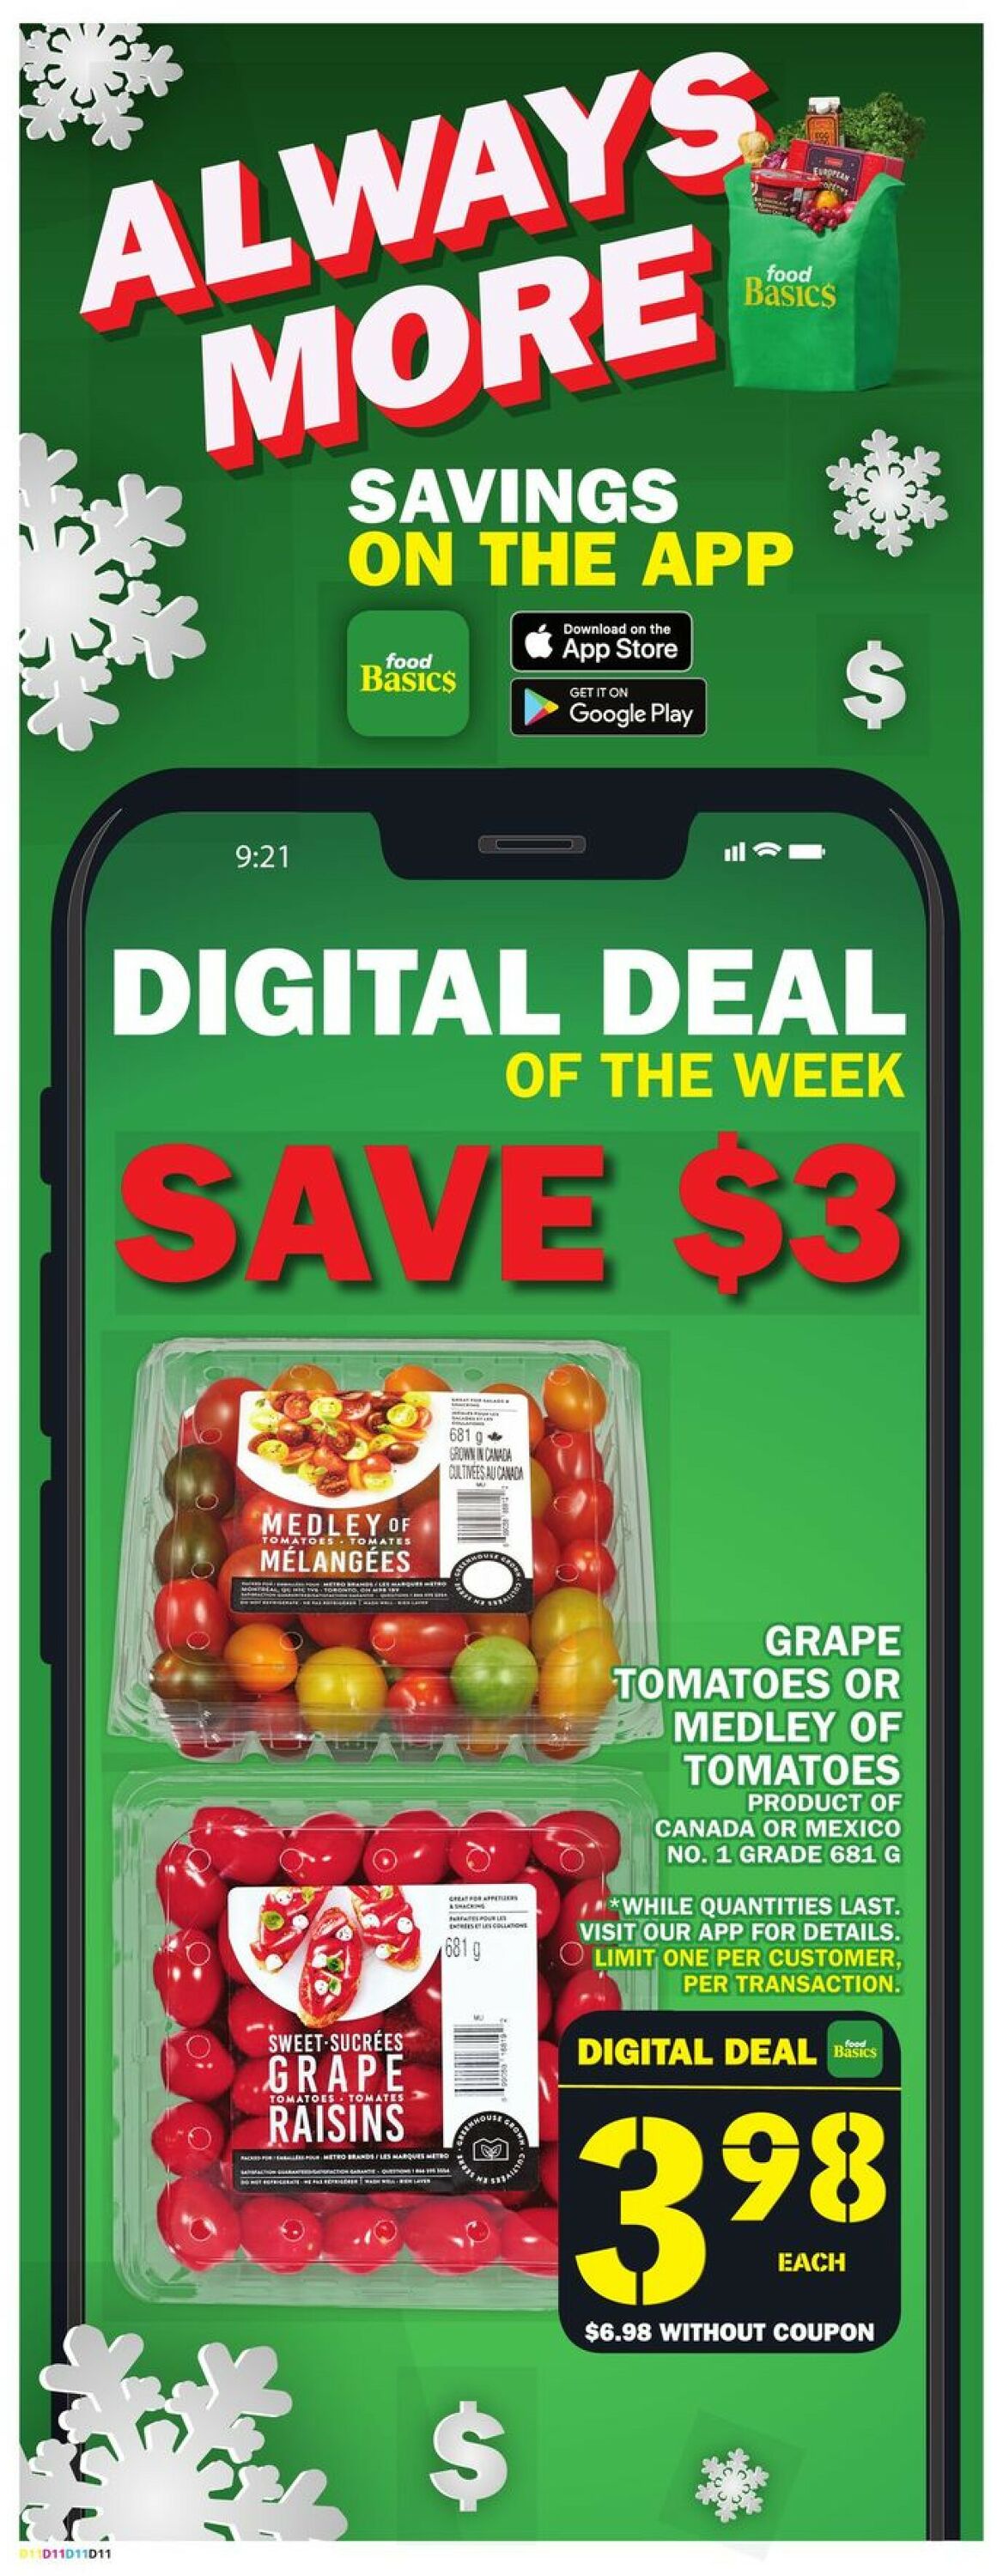 Food Basics Flyer from 12/15/2022